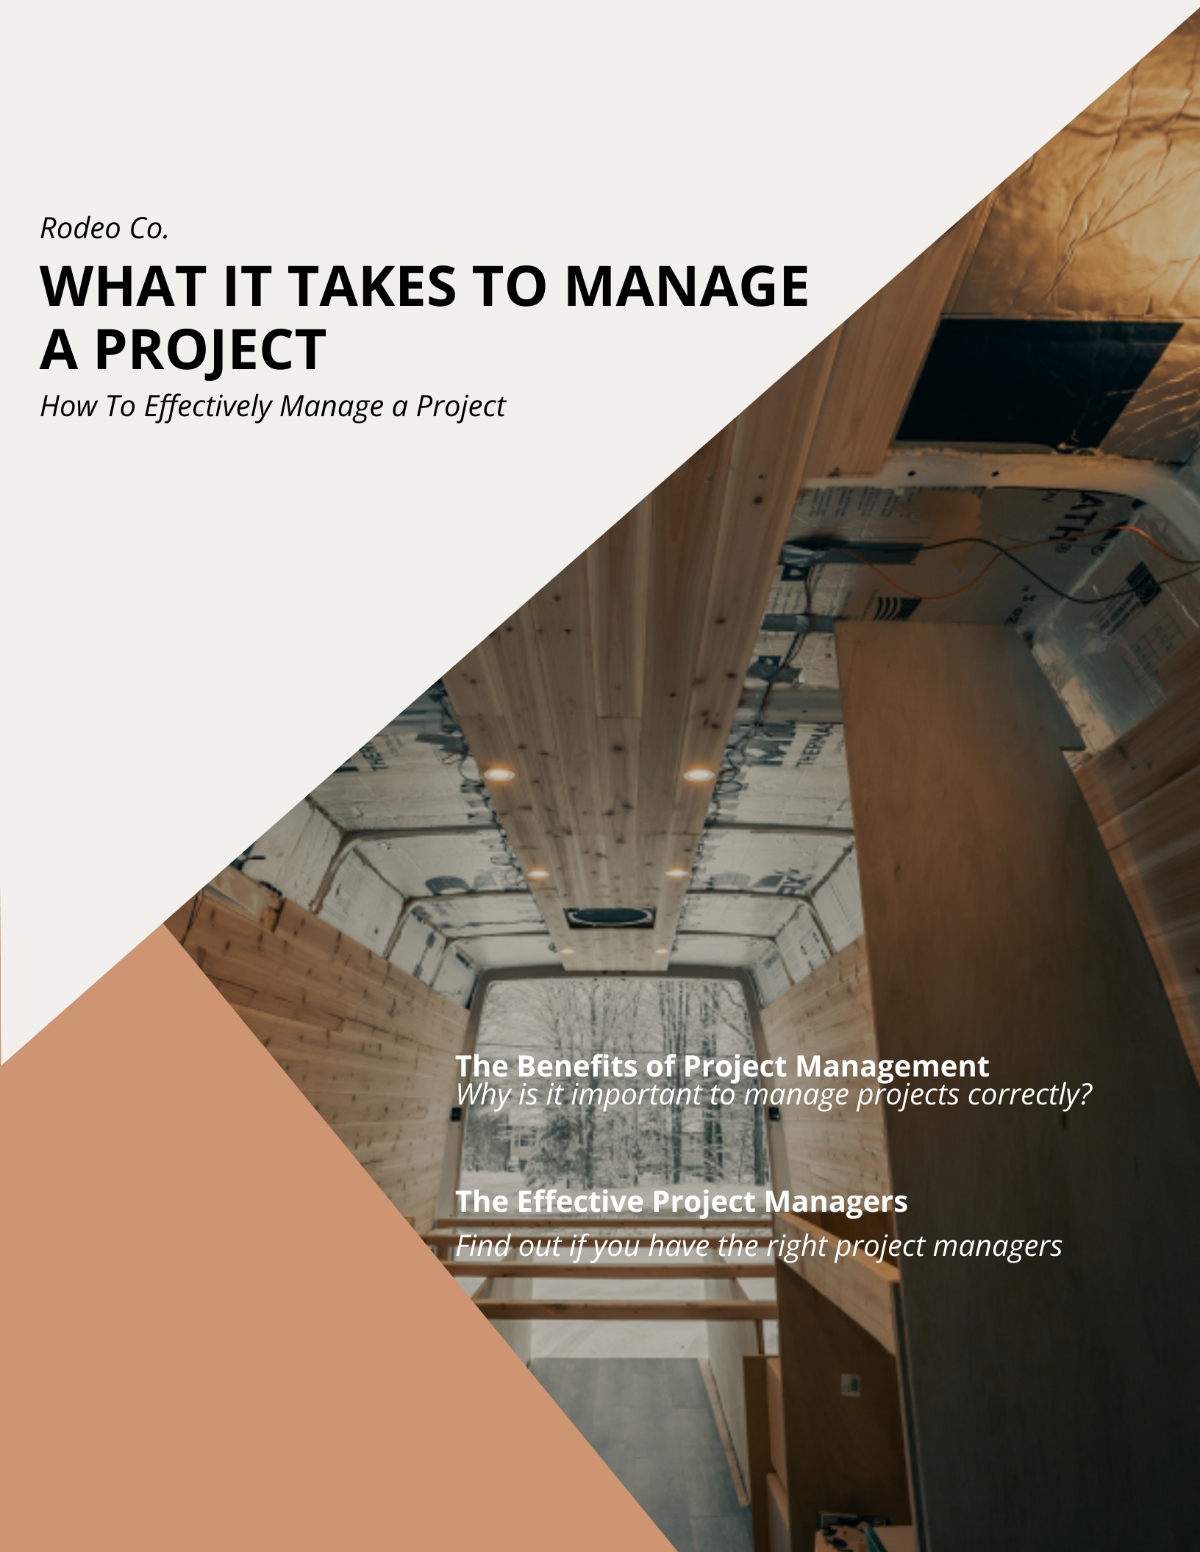 Project Management eBook Template